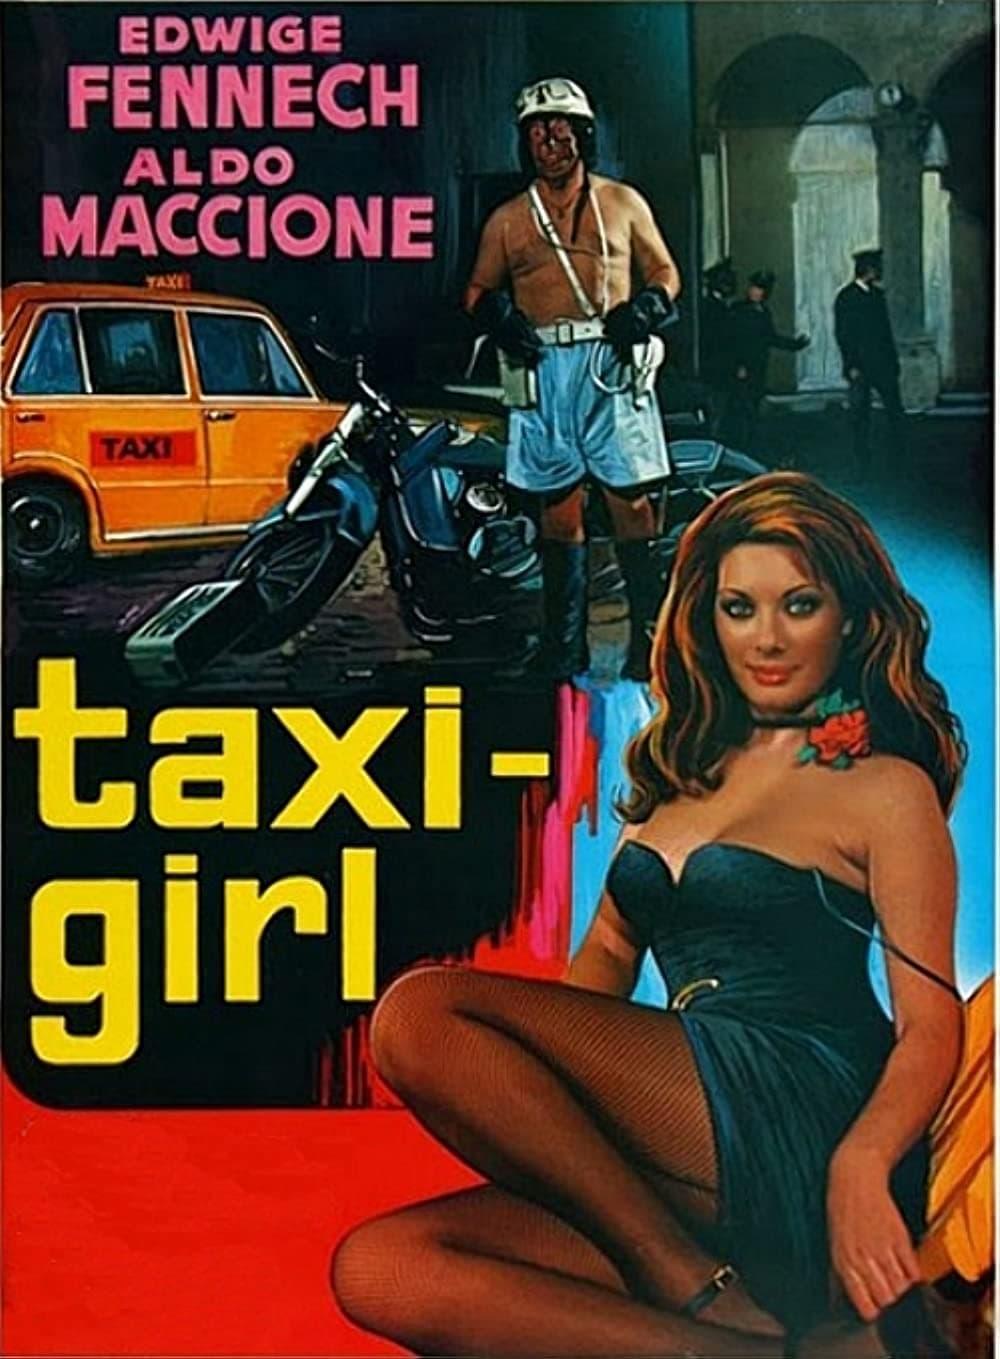 Taxi Girl poster